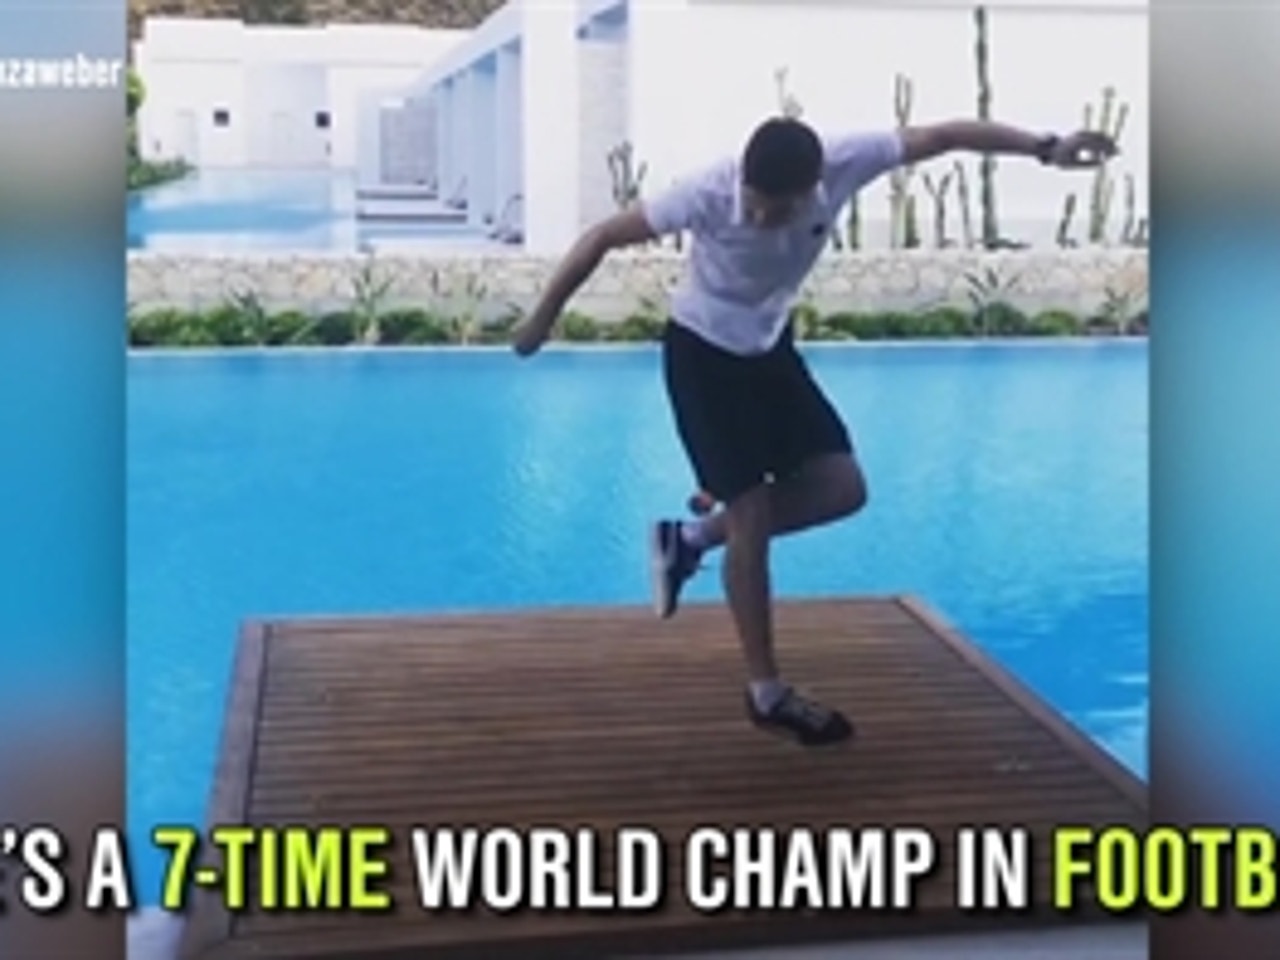 This hacky sack world-champ some serious FOX Sports